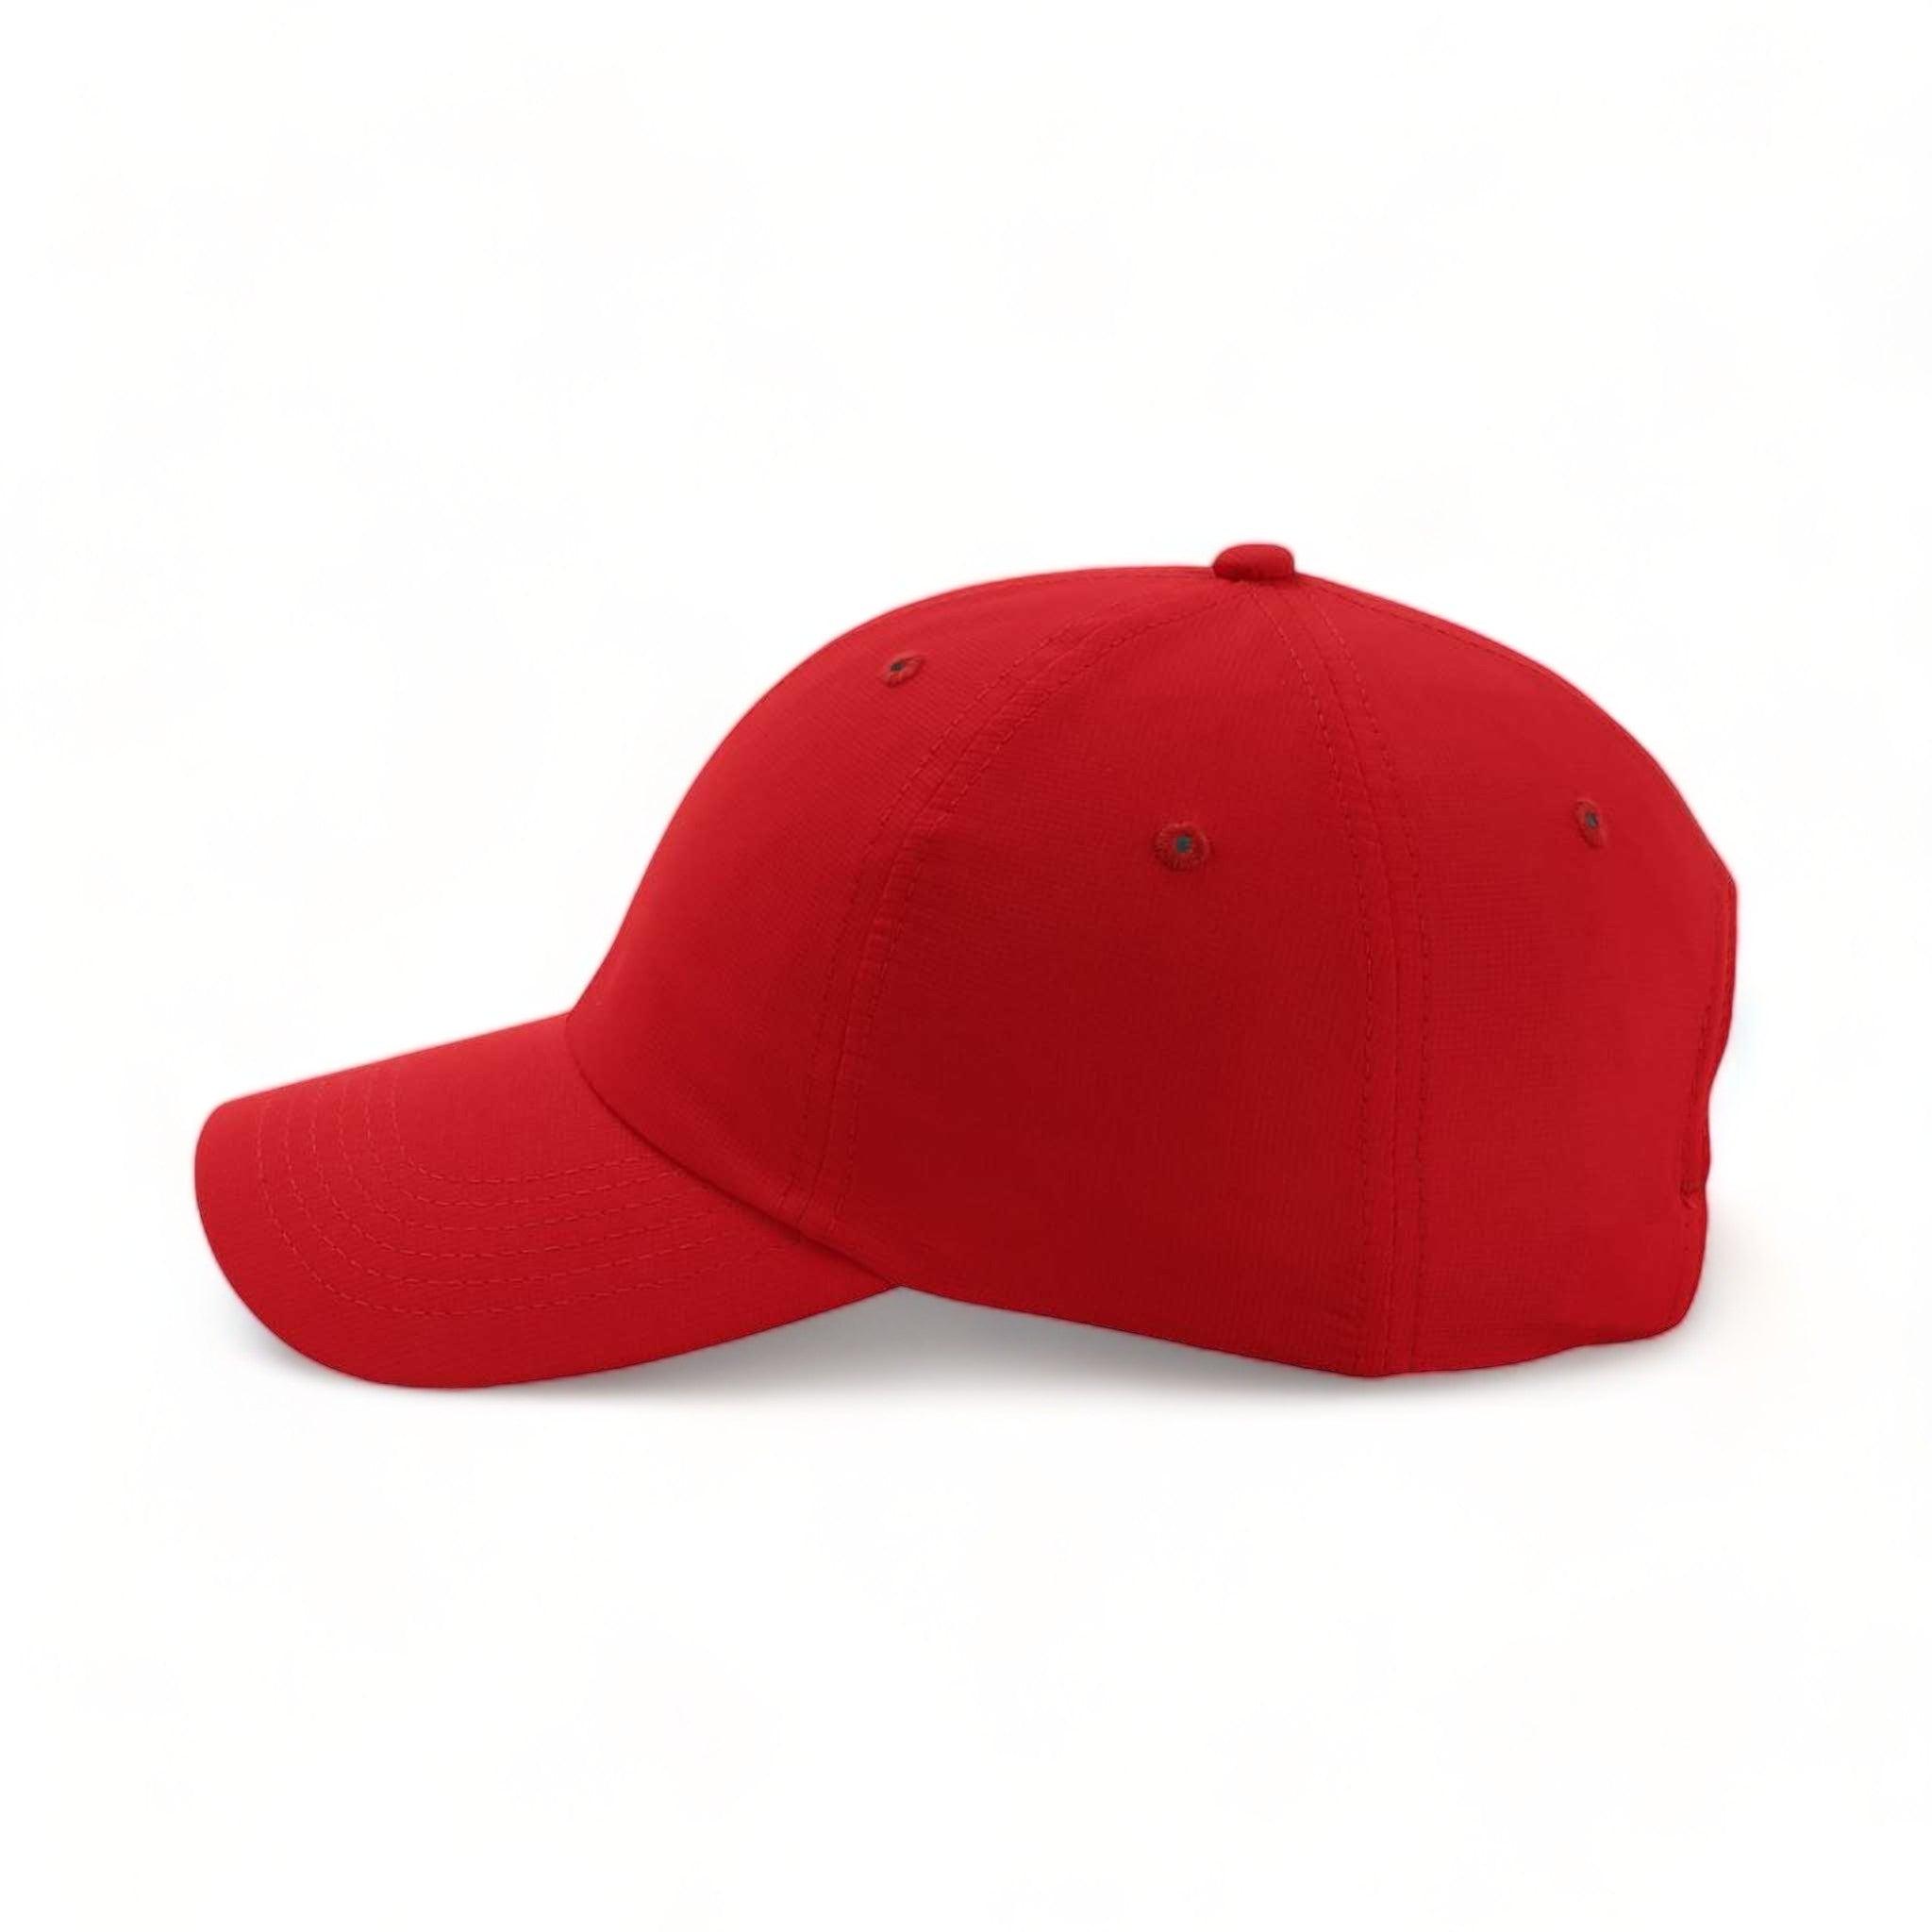 Side view of Imperial X210P custom hat in red pepper